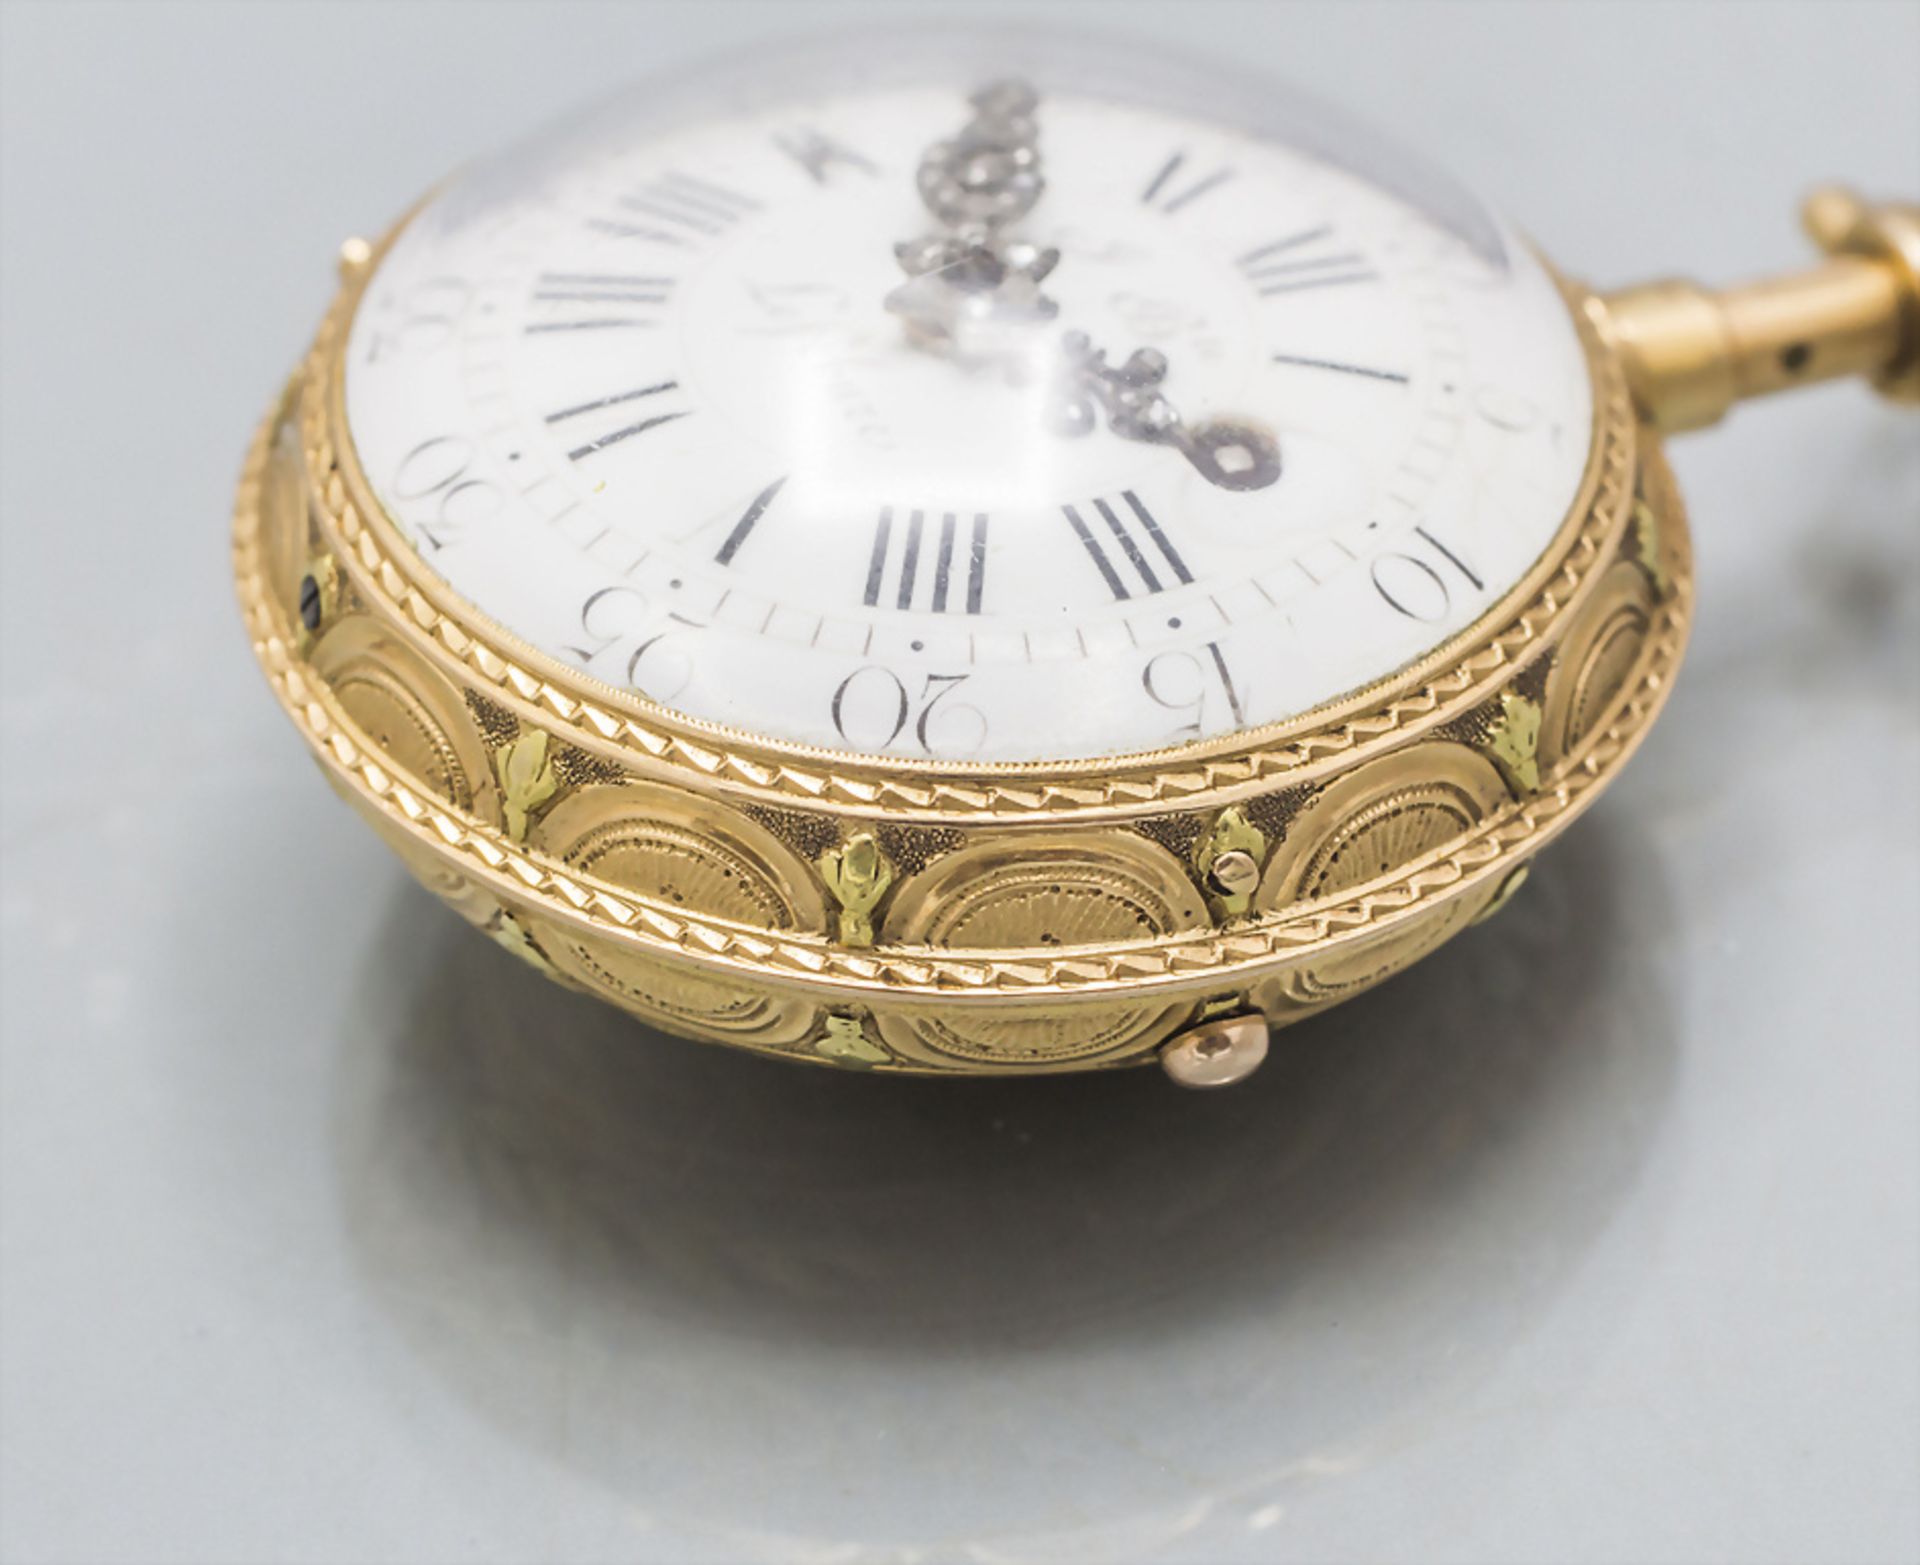 Offene Taschenuhr 1/4 Std. Repetition / A 18 ct gold open faced watch, Jean Baptiste LeFebure, ... - Image 8 of 9